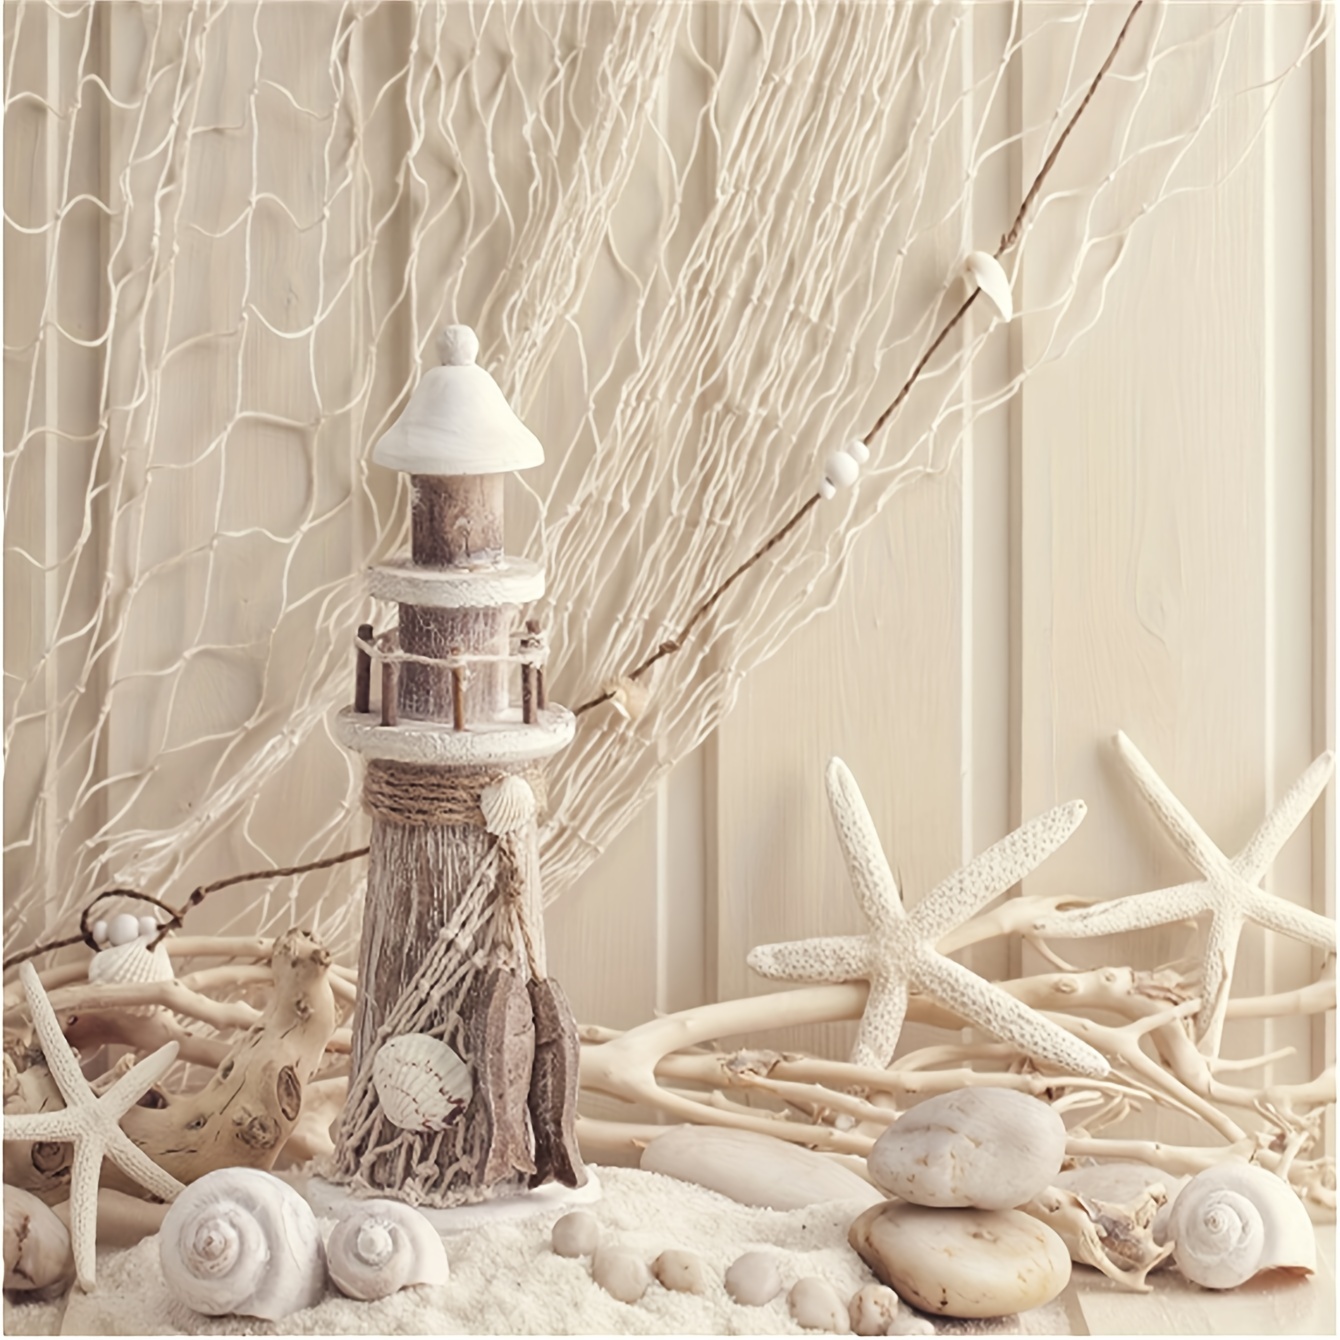 Decorative Fishing Net,Fishnet Decoration with Shells,Mediterranean Style  Wall Decoration for Home and Wall 1 * 2M Beige 